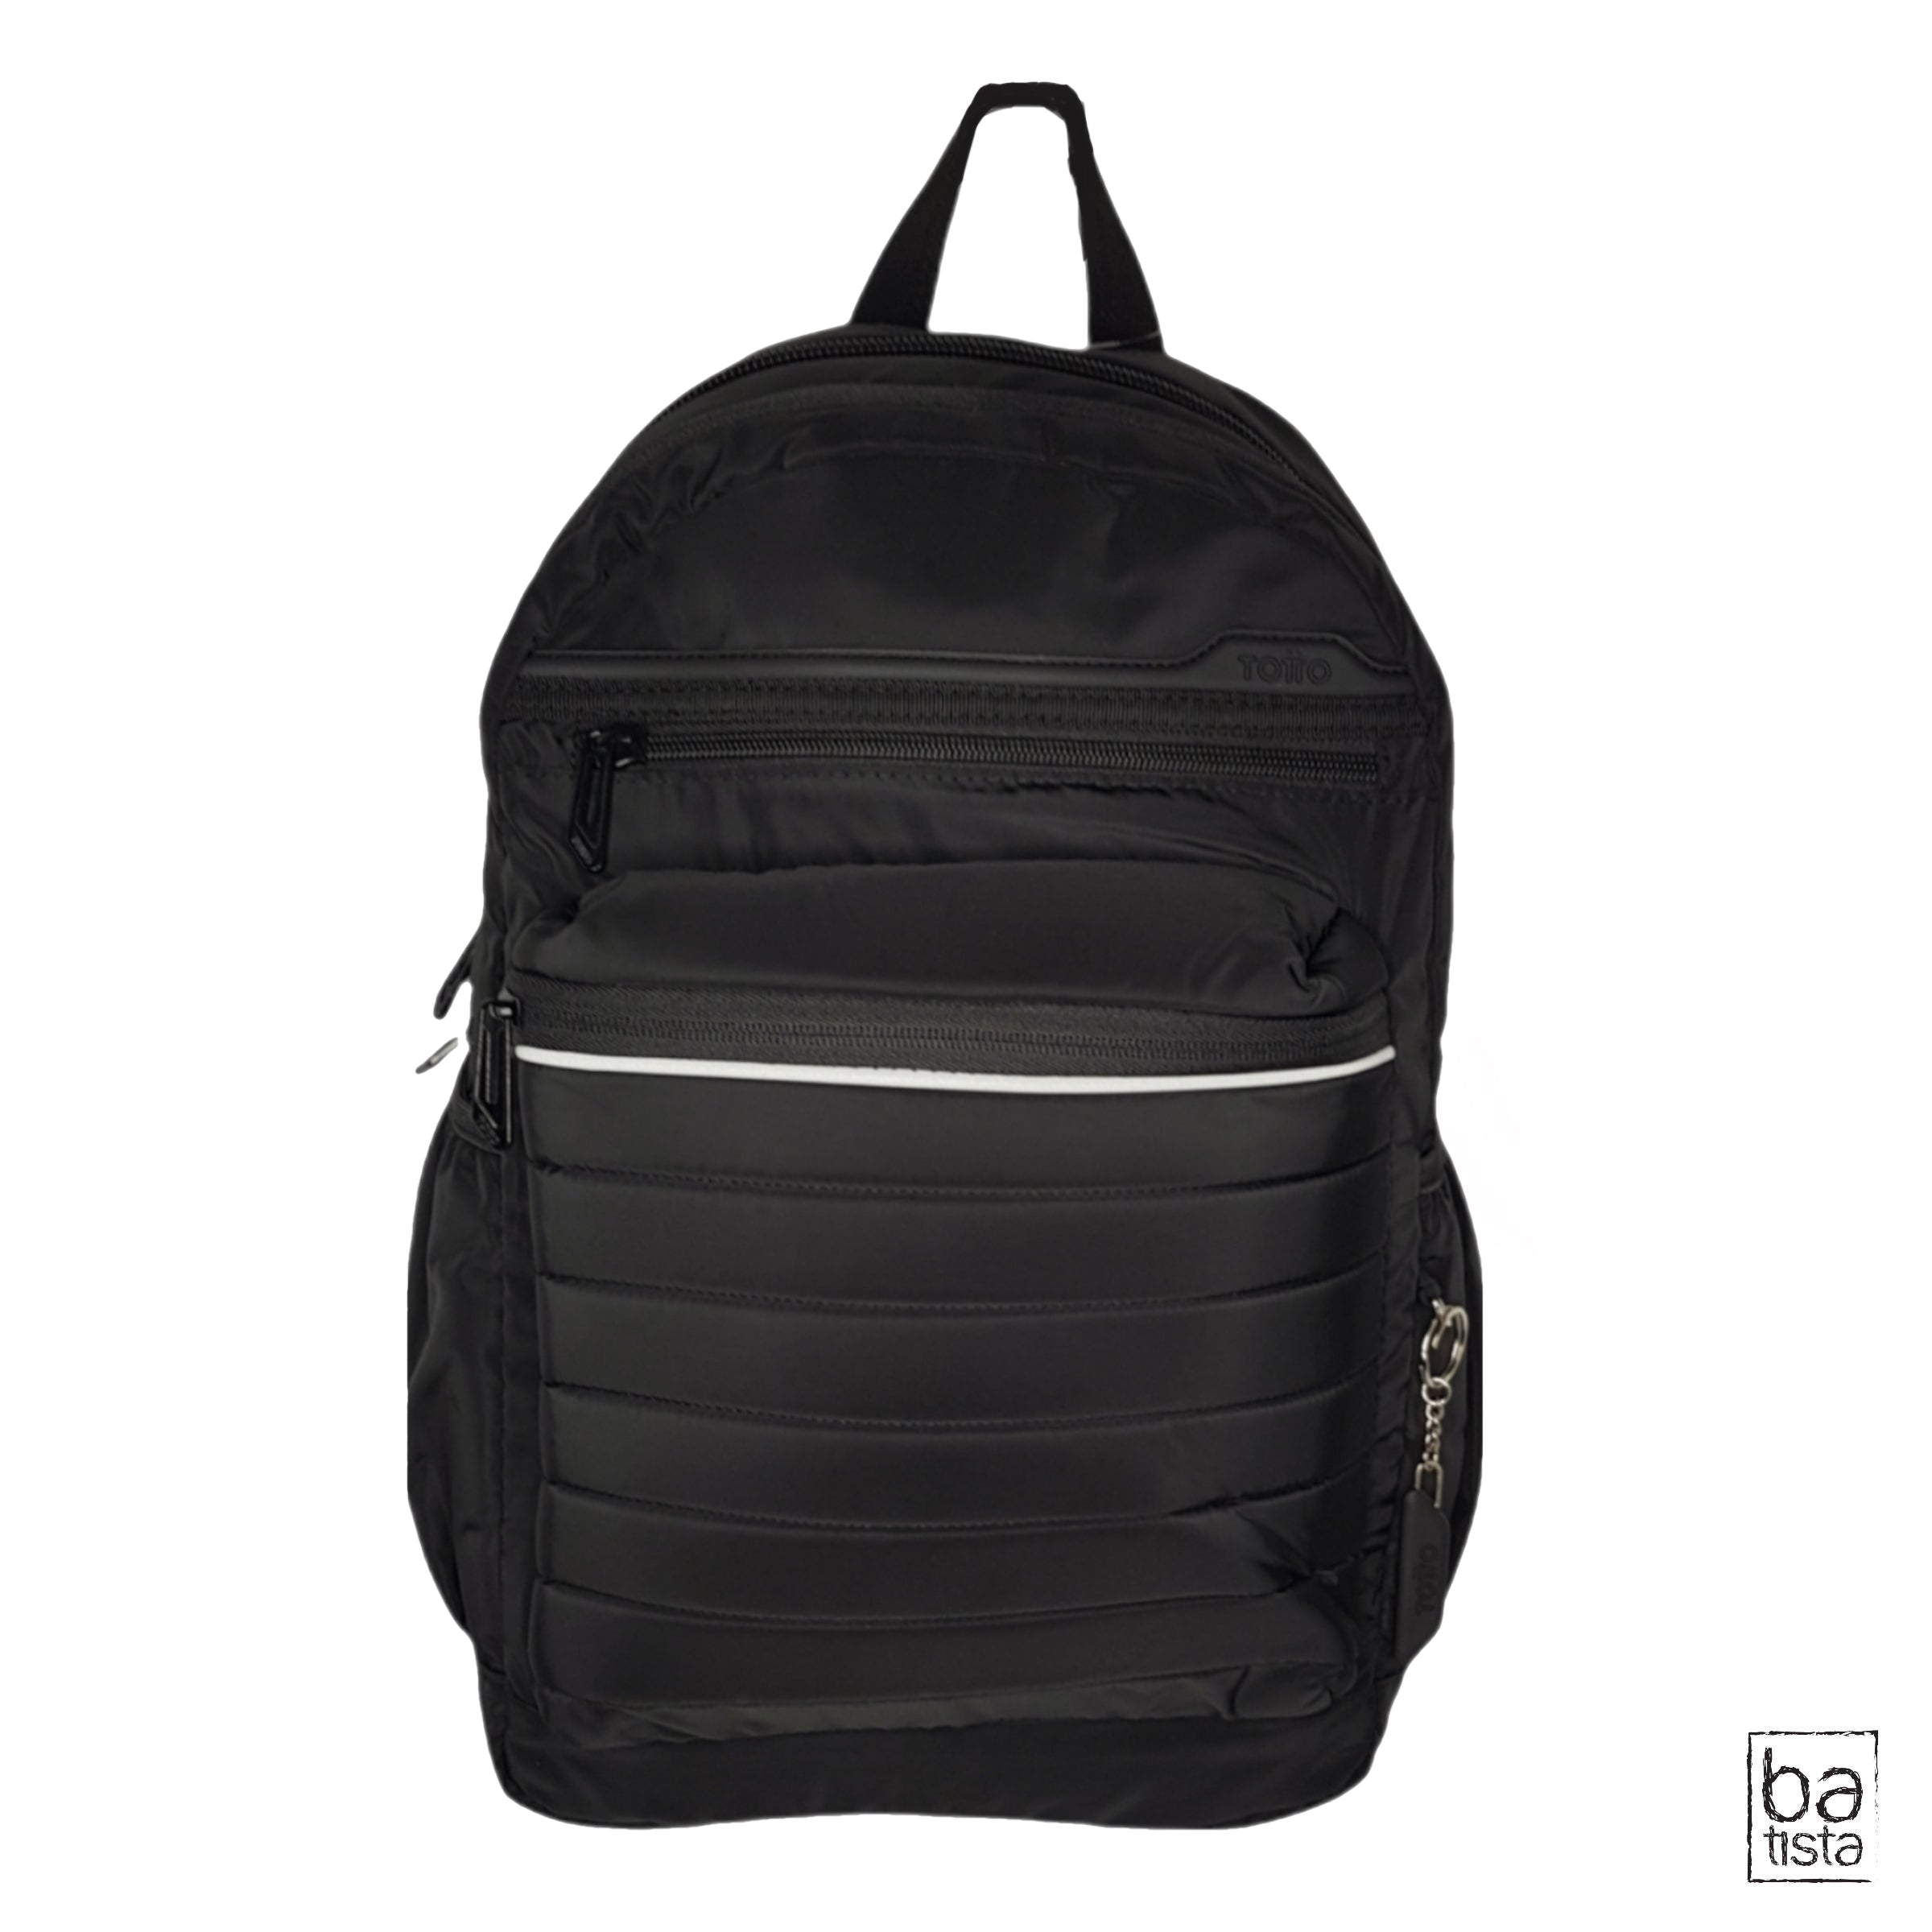 Morral Totto Plaine N01 21.82 Lts